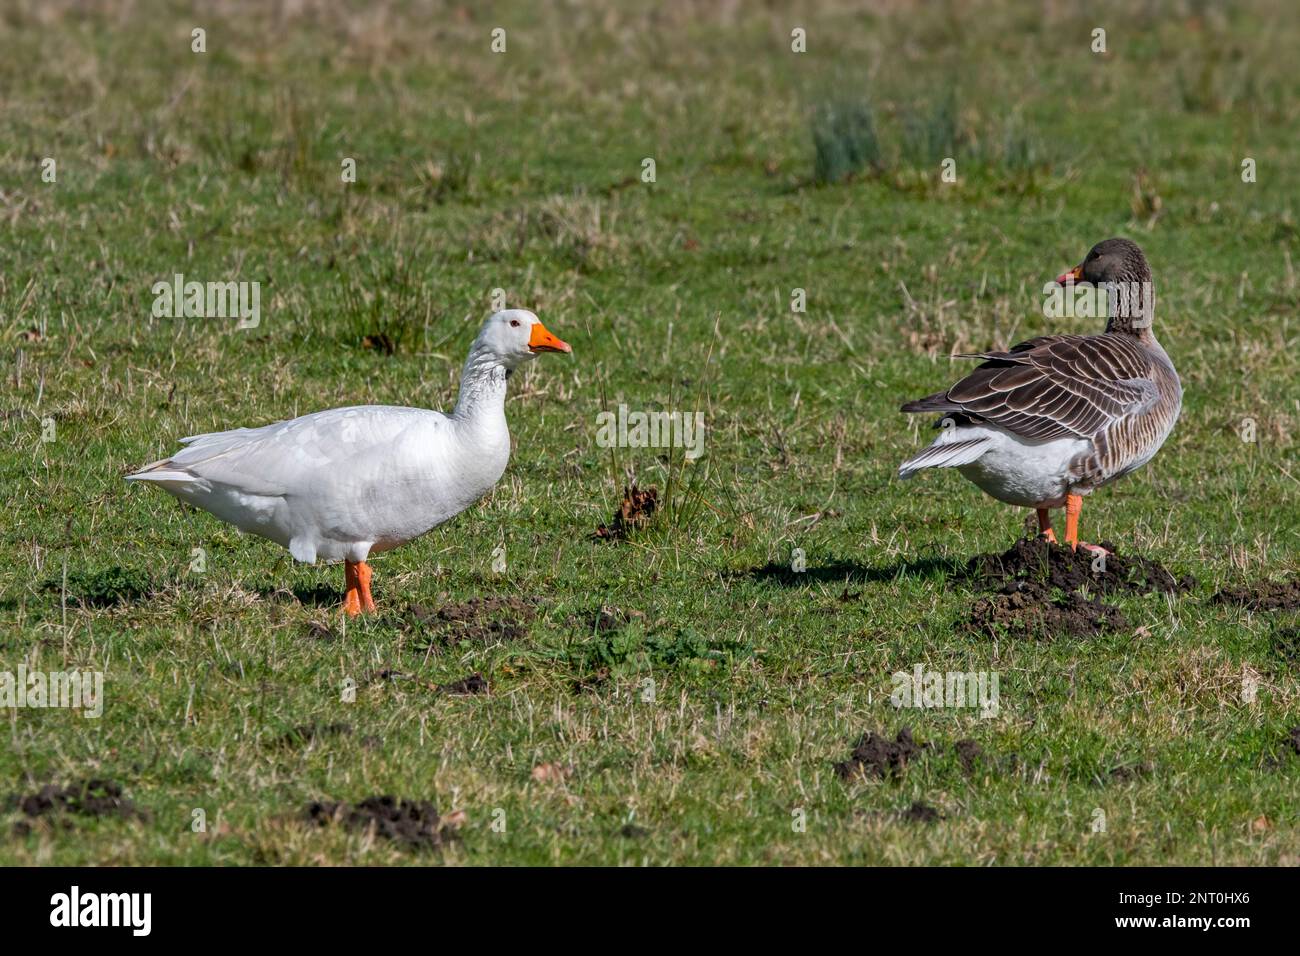 Escaped Emden goose / Embden, German breed of white domestic goose foraging in grassland with greylag goose / graylag geese (Anser anser) in winter Stock Photo